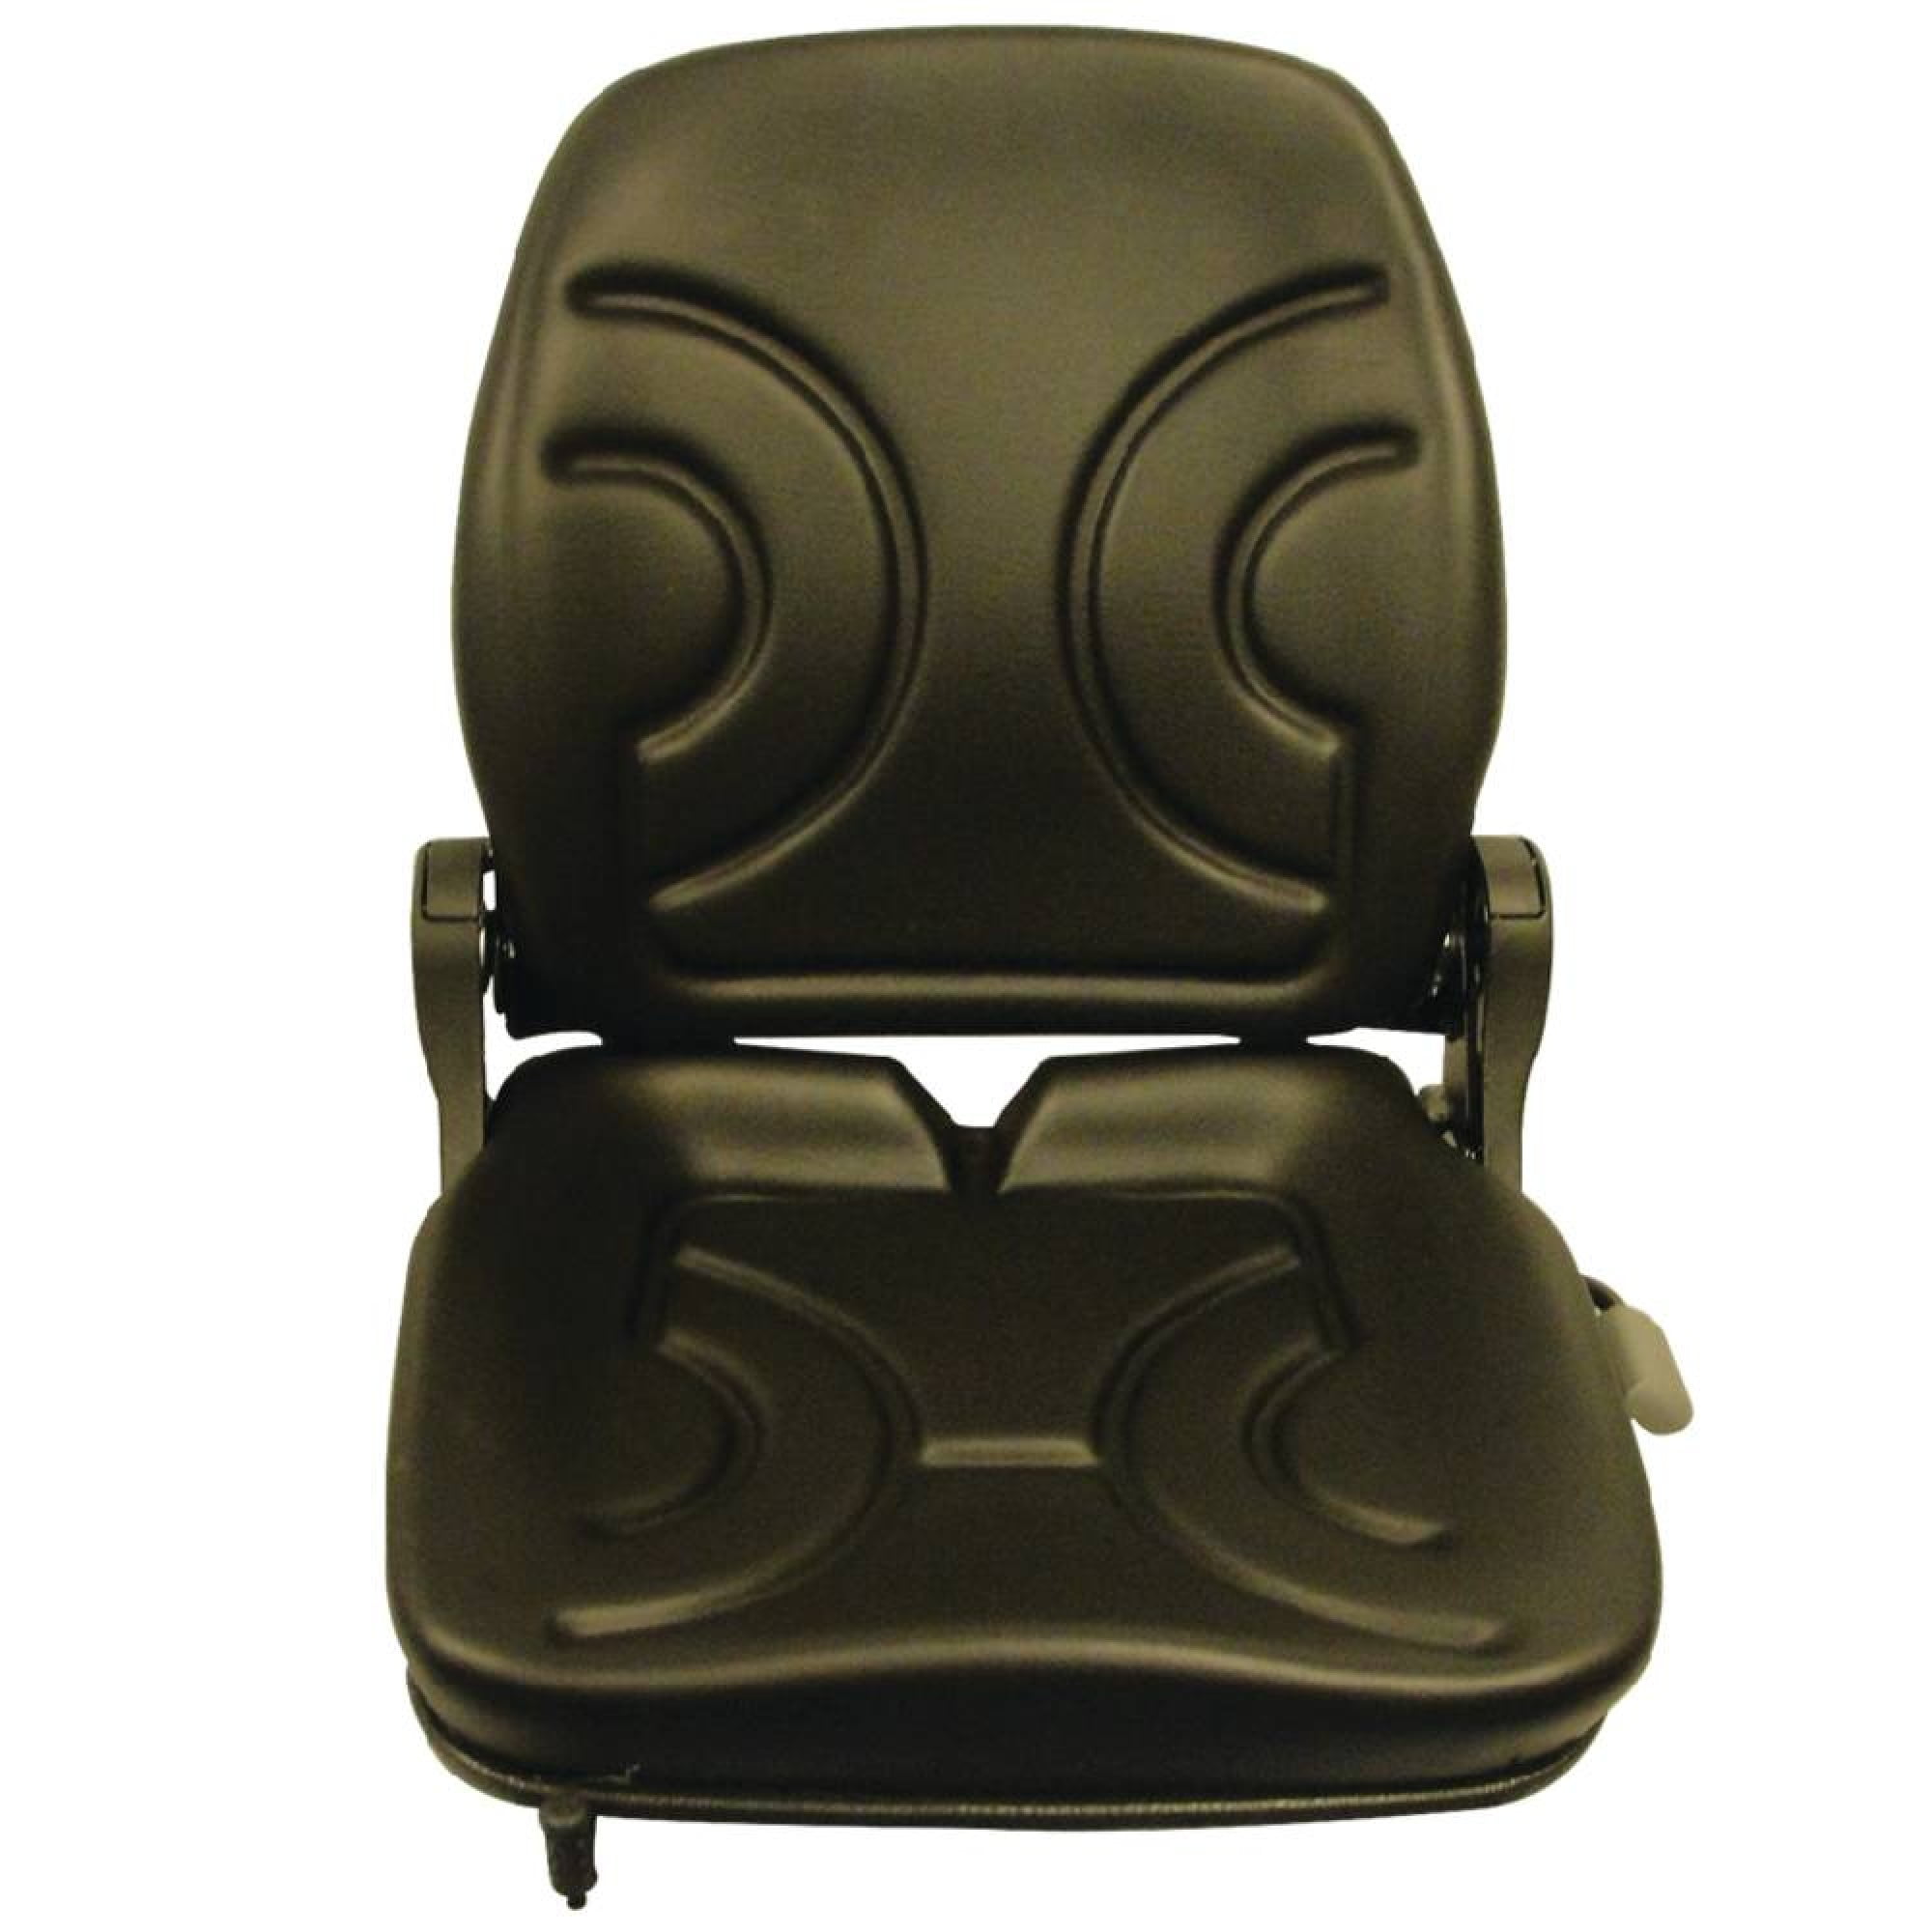 as a result Girlfriend Unemployed Complete Tractor Seat 3010-0042 21 1/2" Height, 17 1/2" Length, 19" Width  For Industrial Tractors - Walmart.com